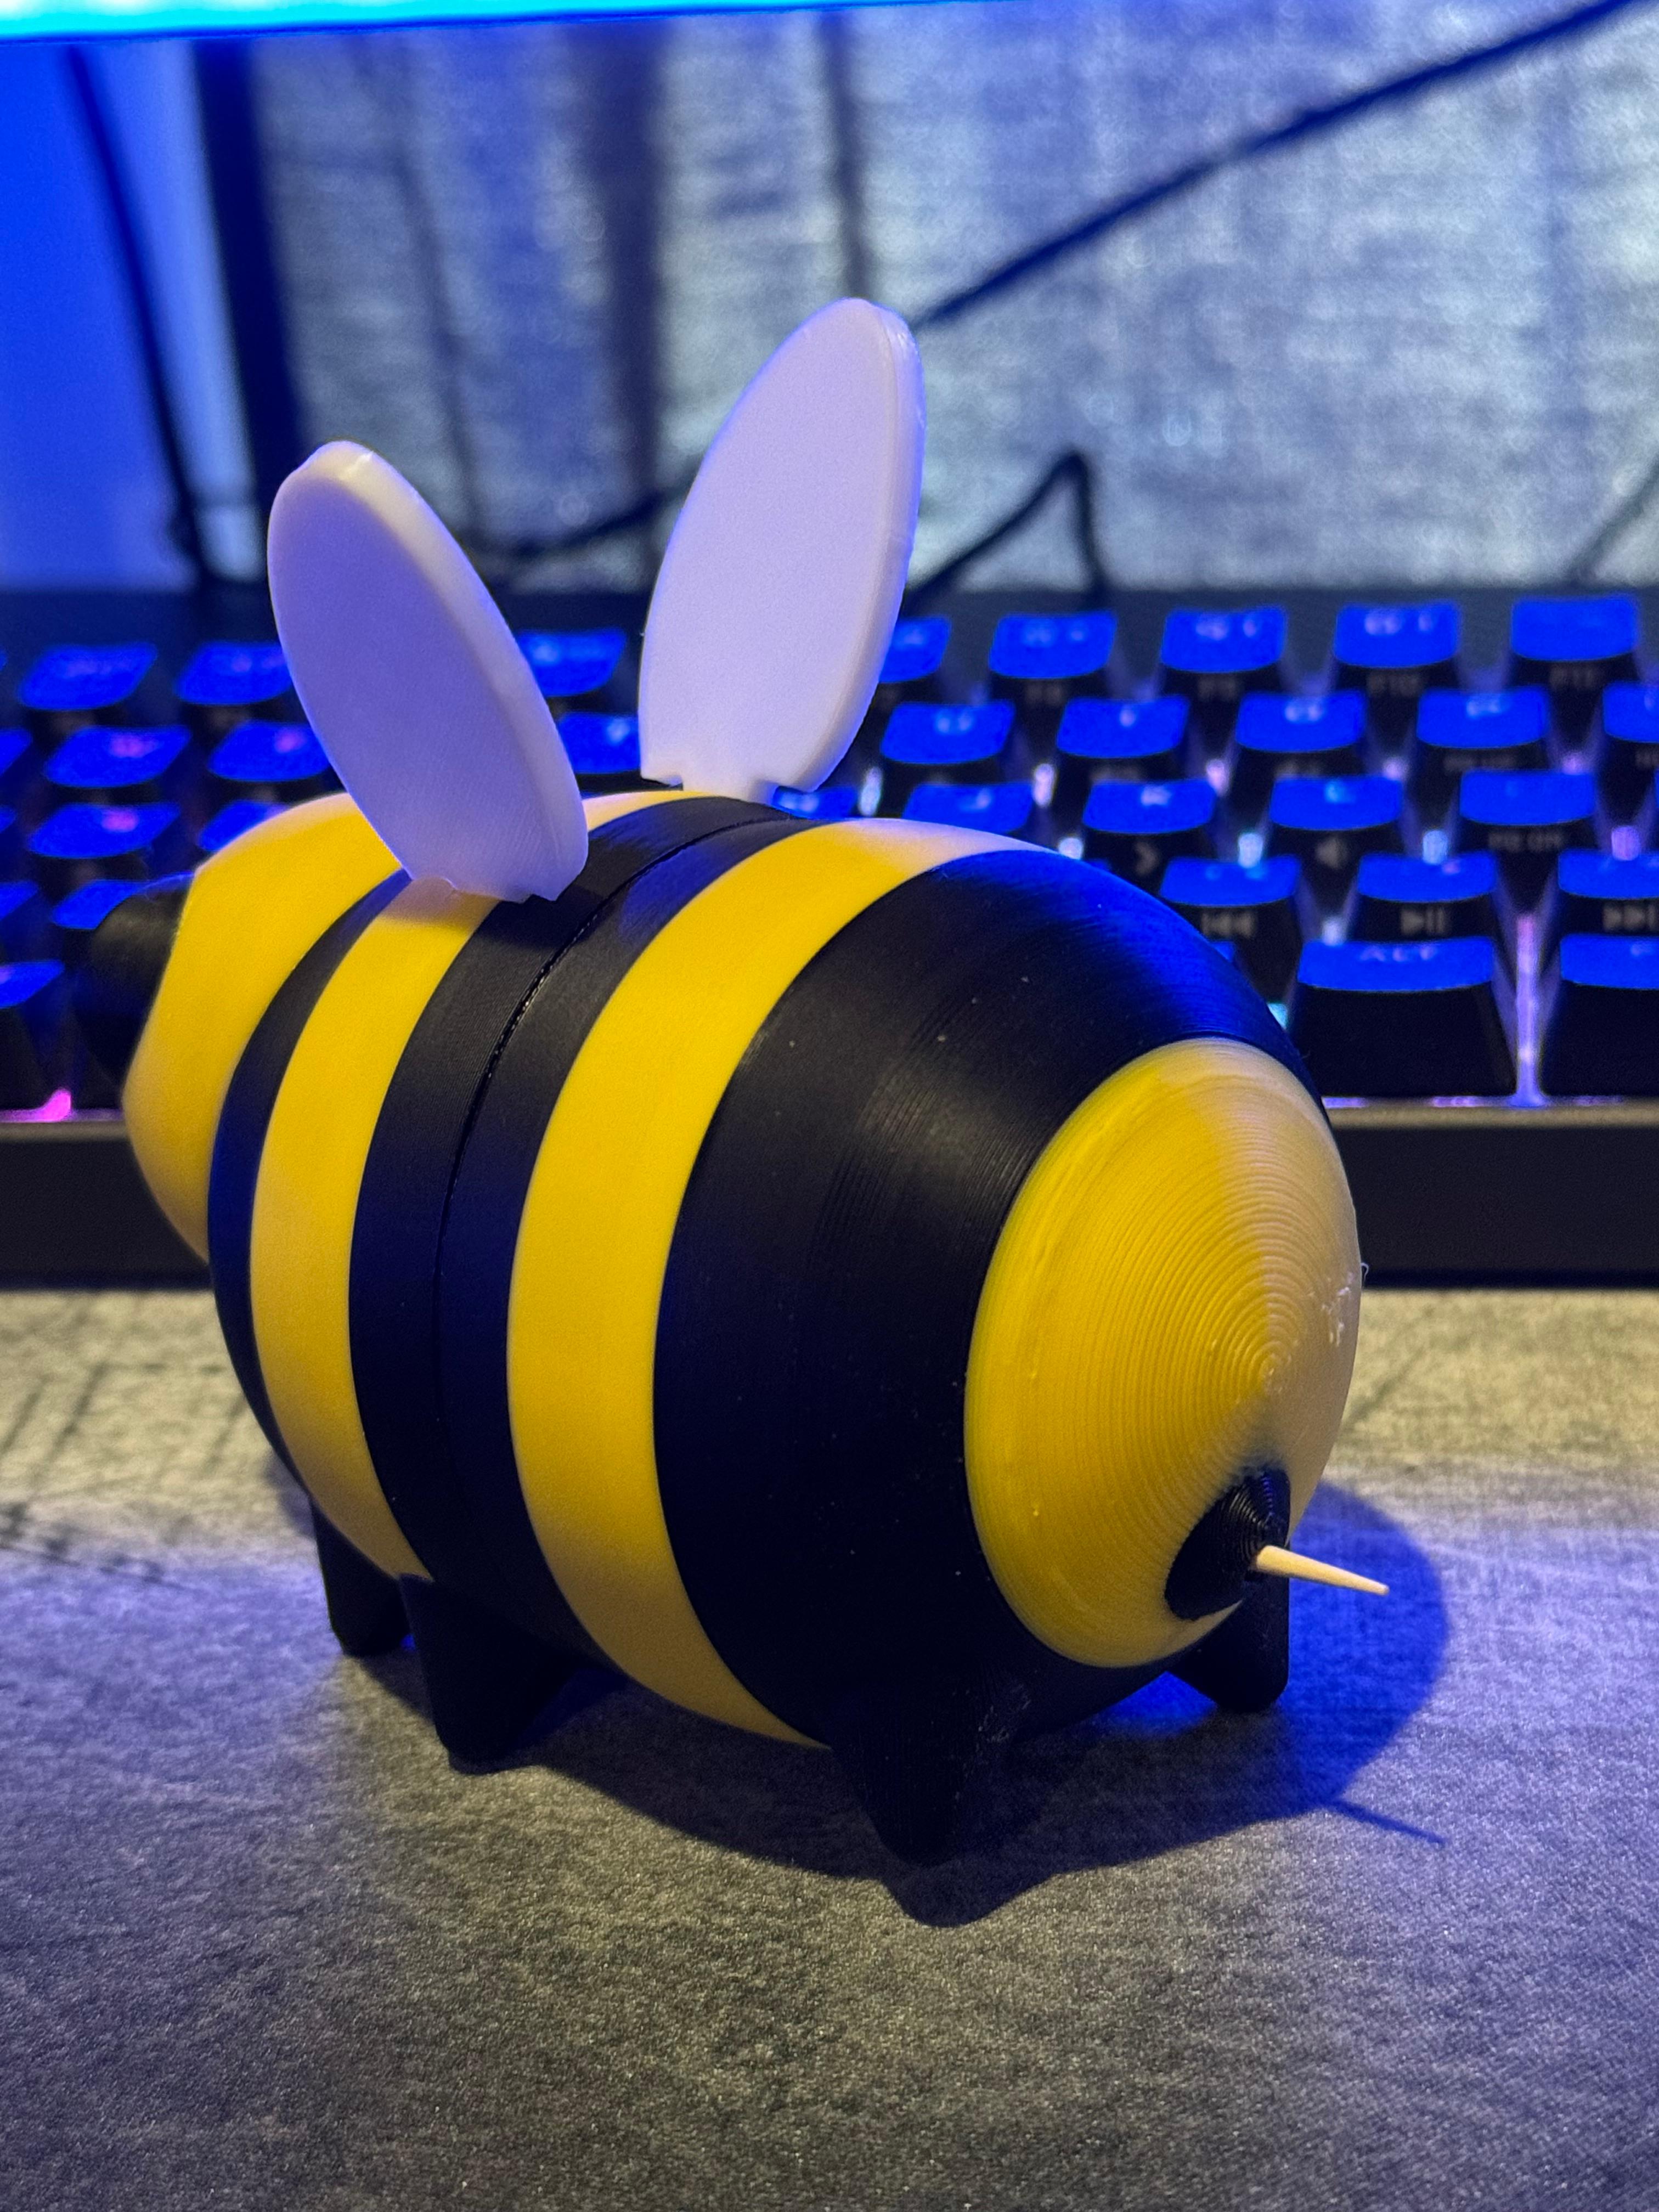 Bee Toothpick Holder / 3MF Included 3d model